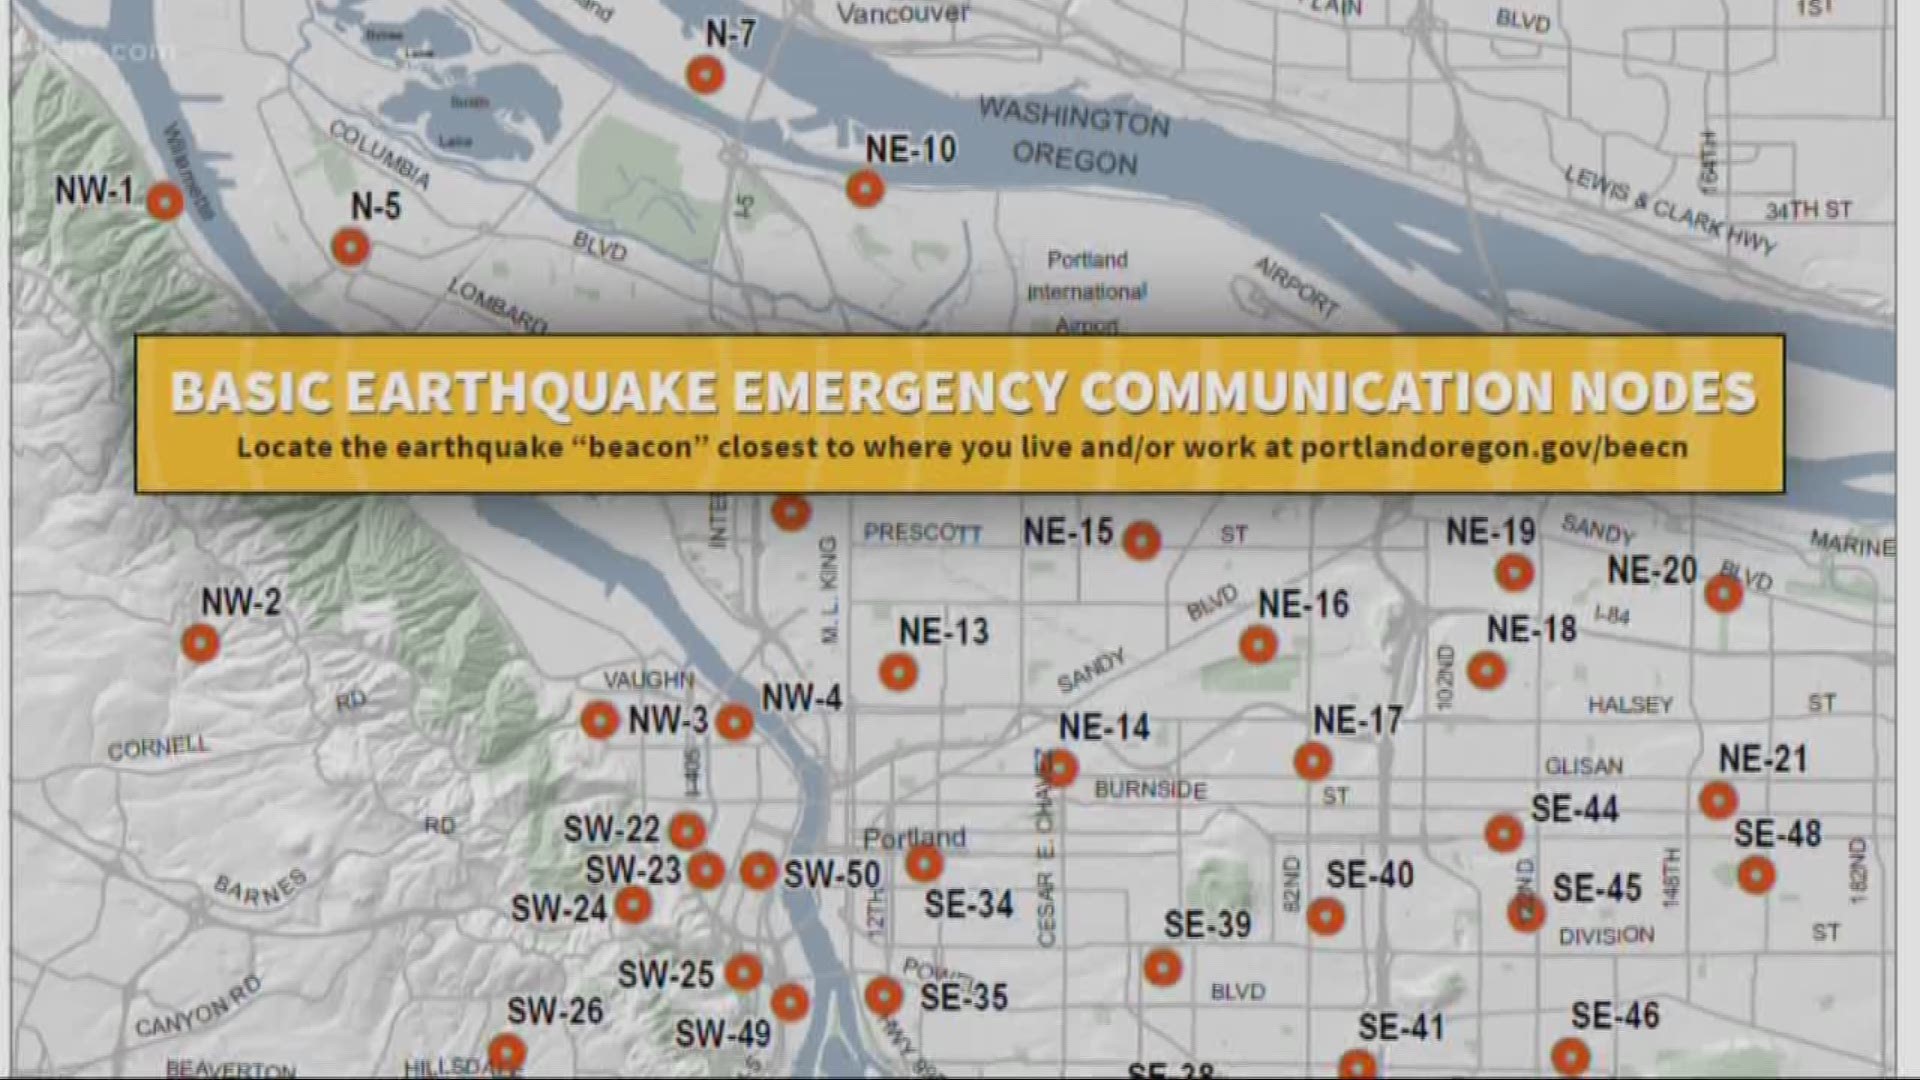 We look at the earthquake resources around Portland.